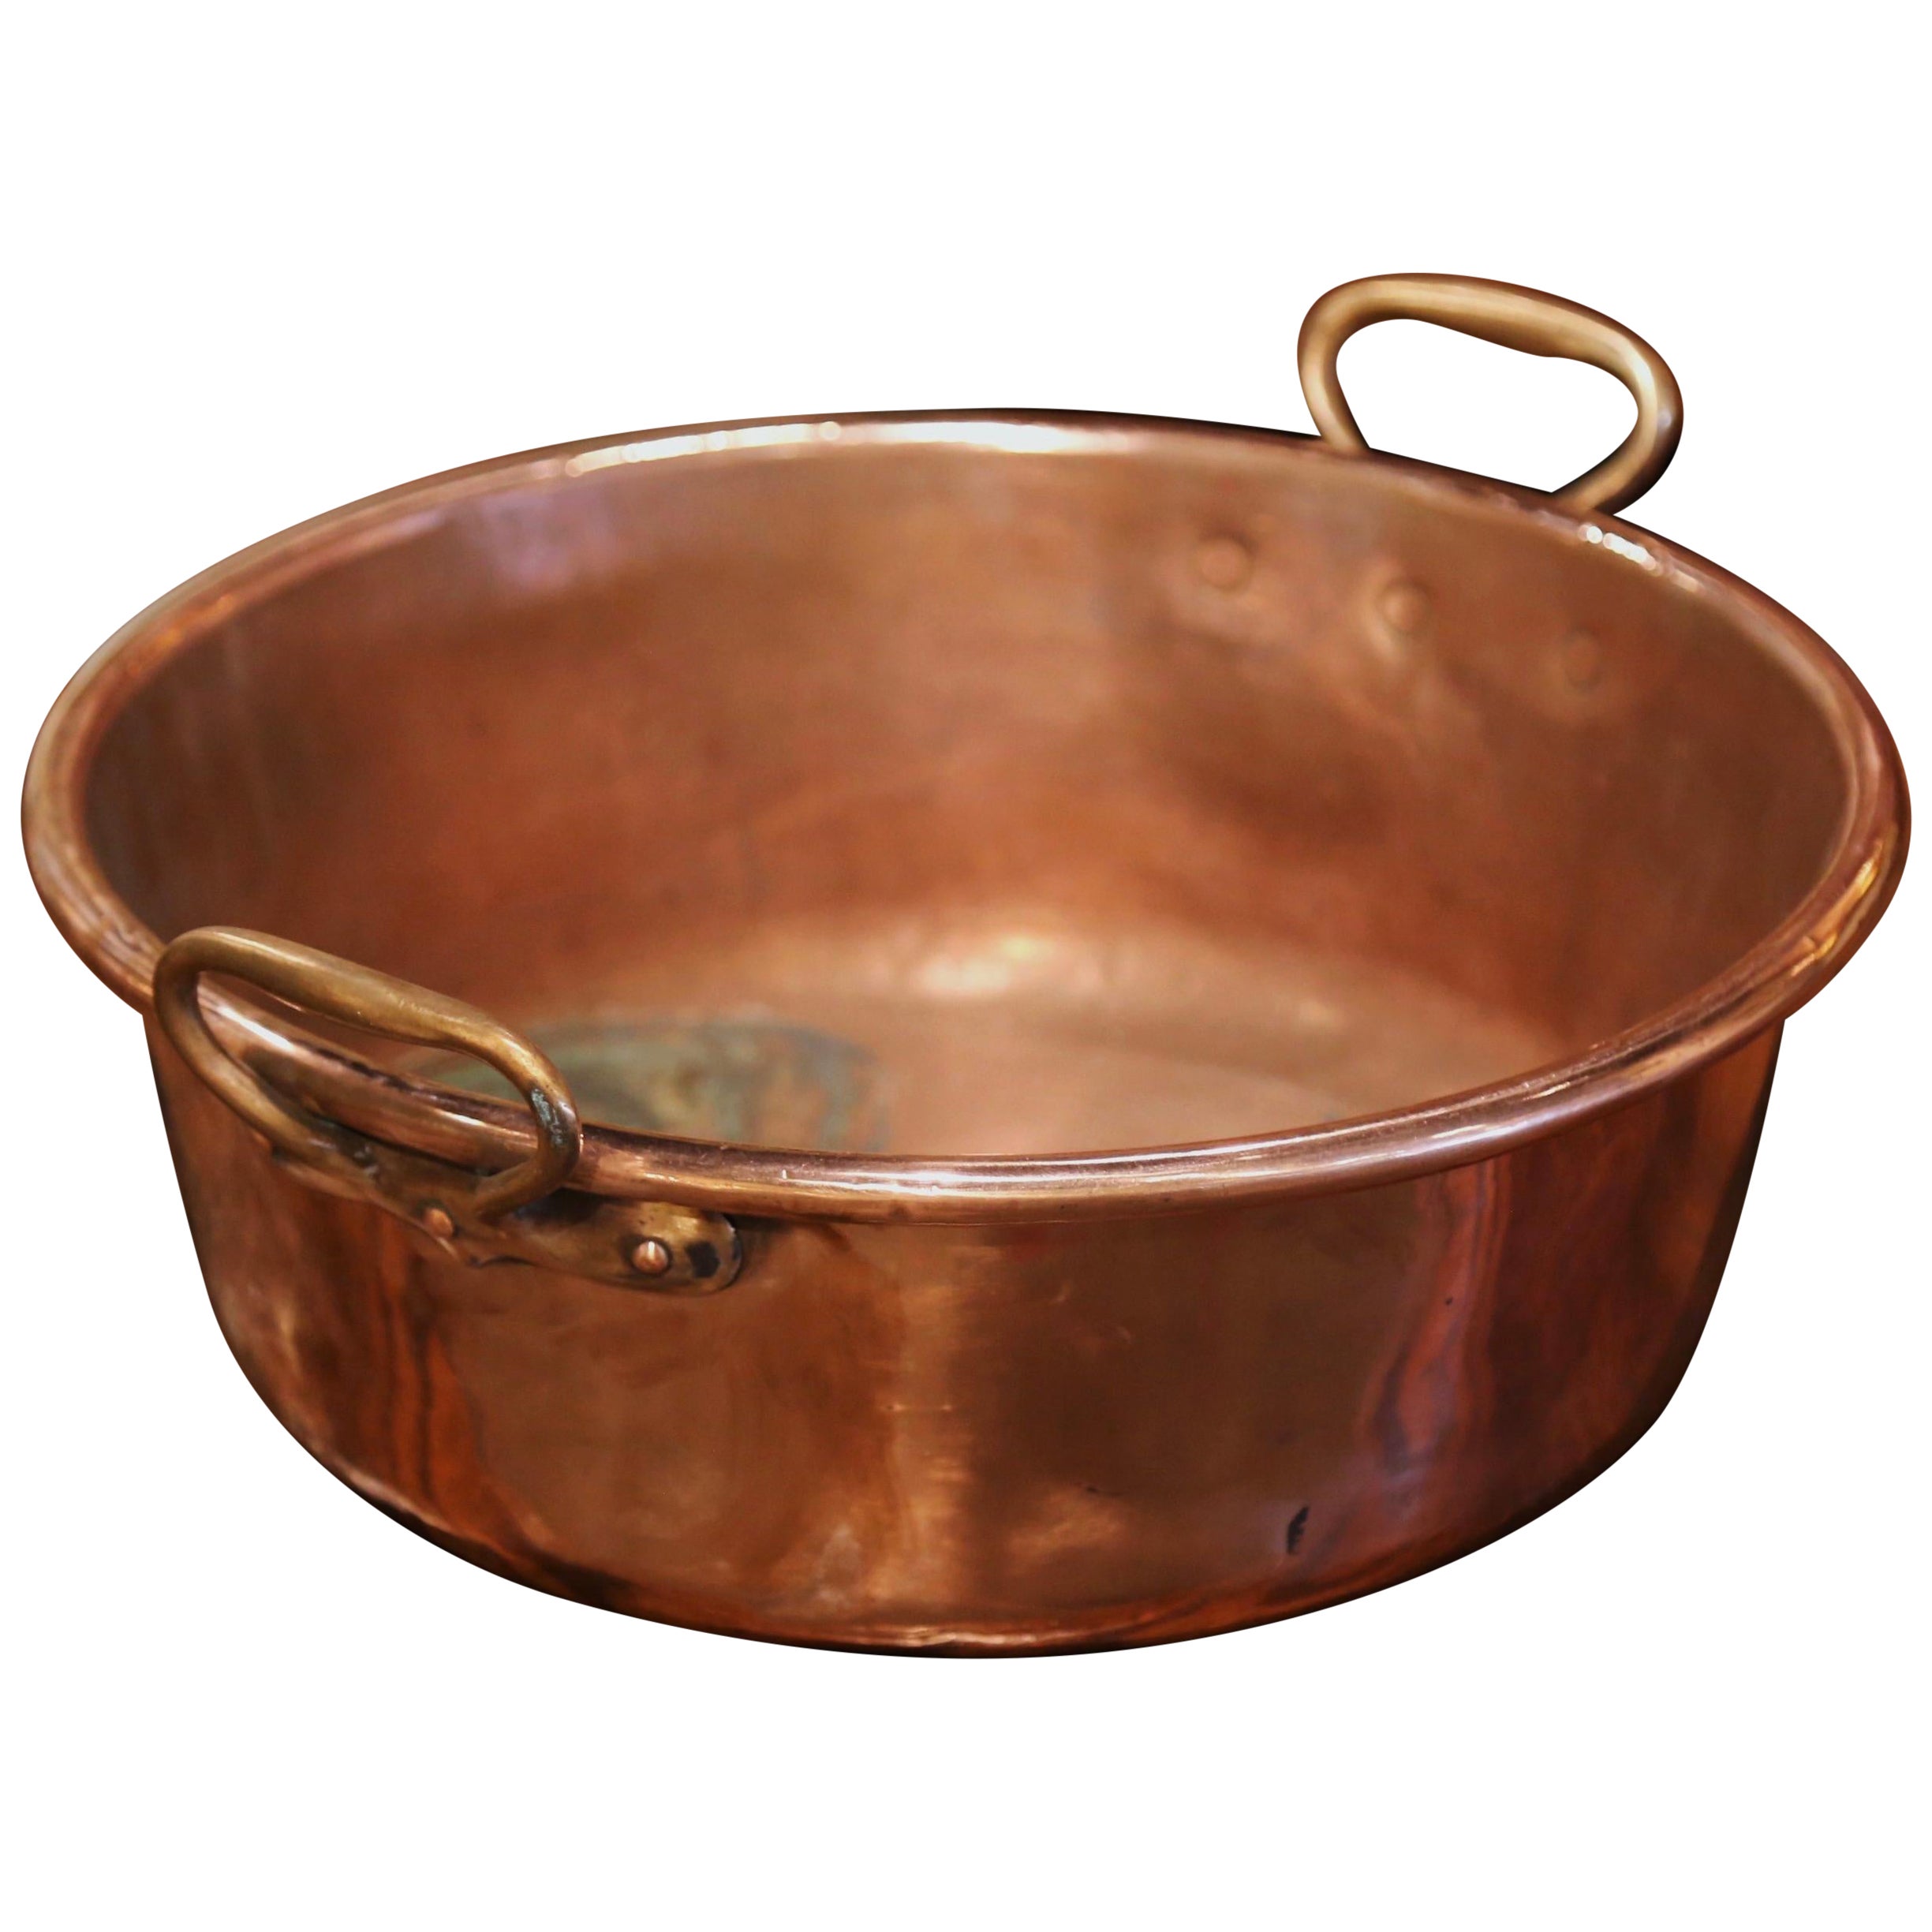 Mid-19th Century French Copper and Brass Jelly Boiling Bowl with Handles